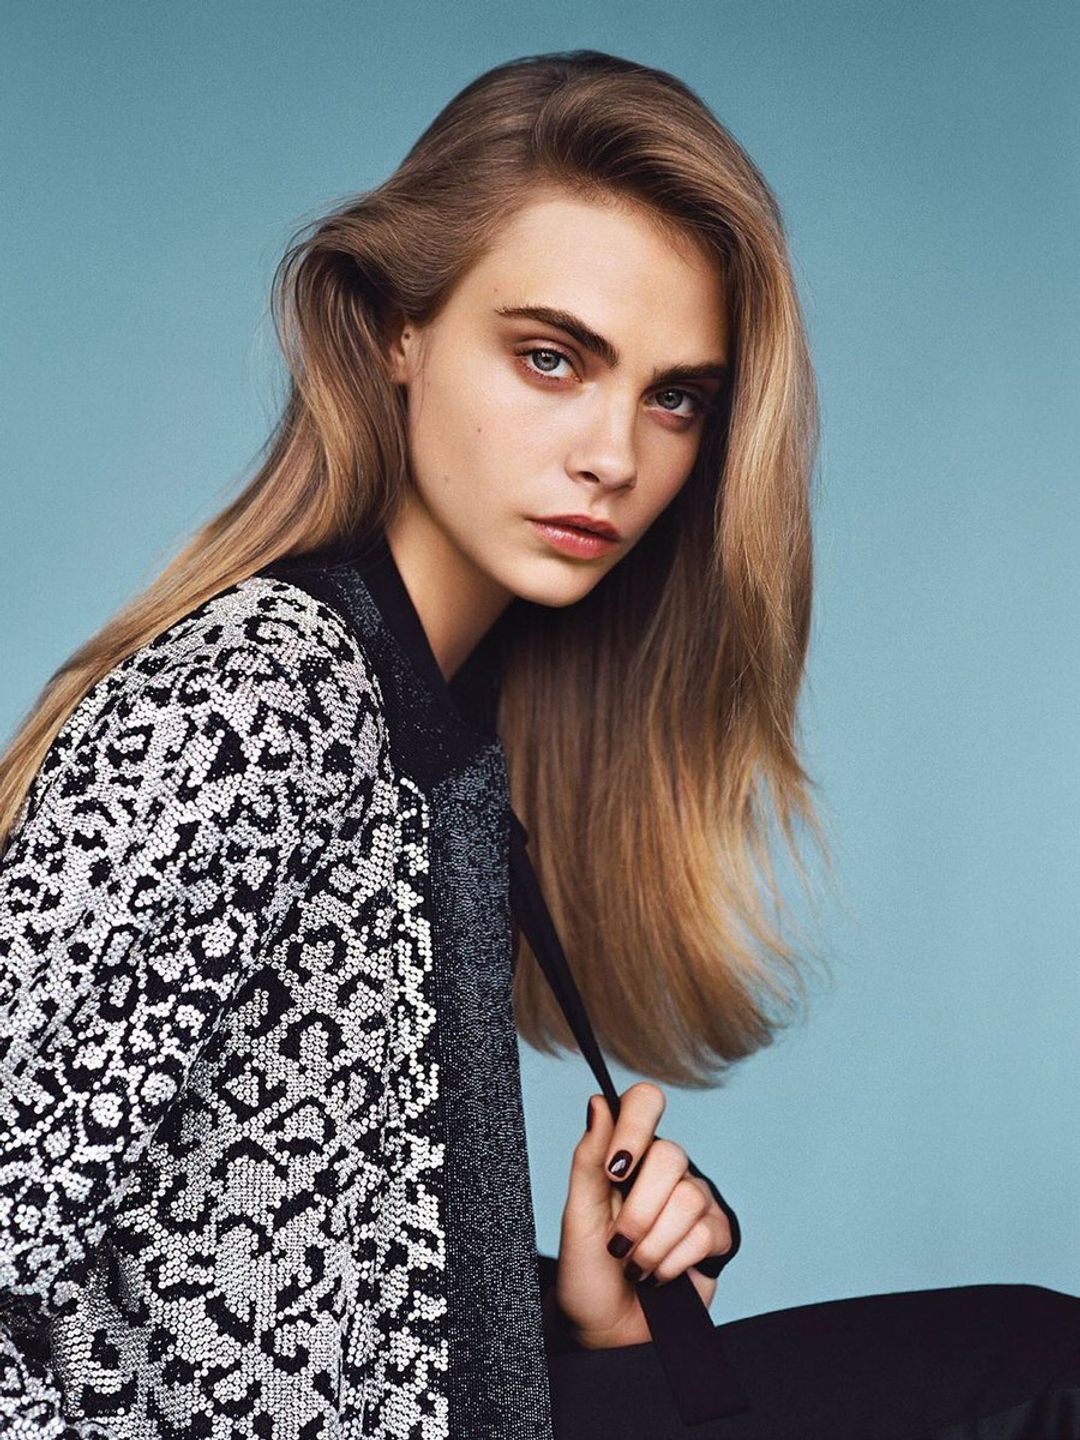 Cara Delevingne how old is she